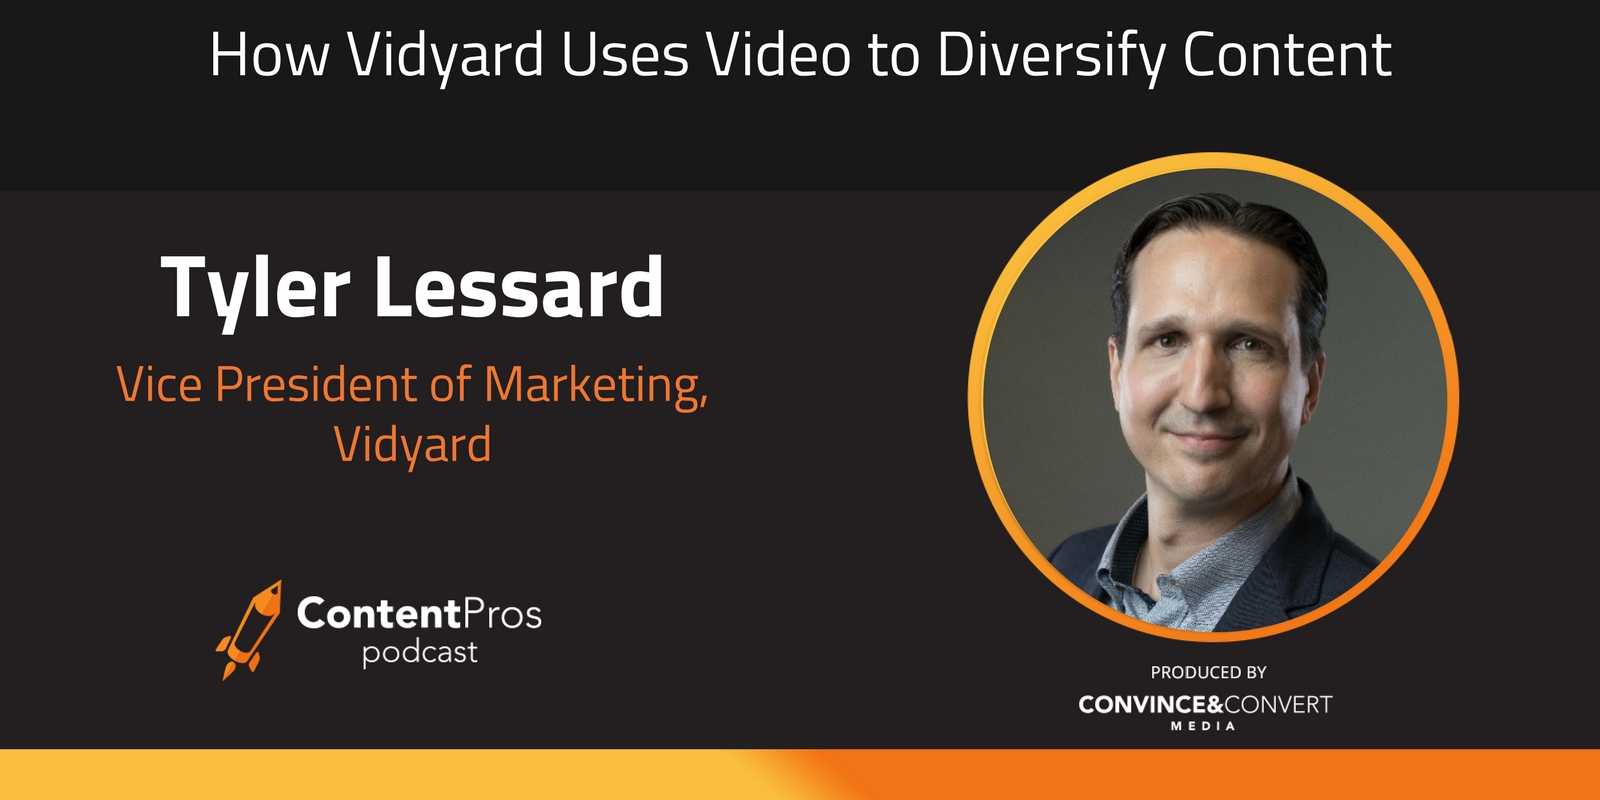 How Vidyard Uses Video to Diversify Content